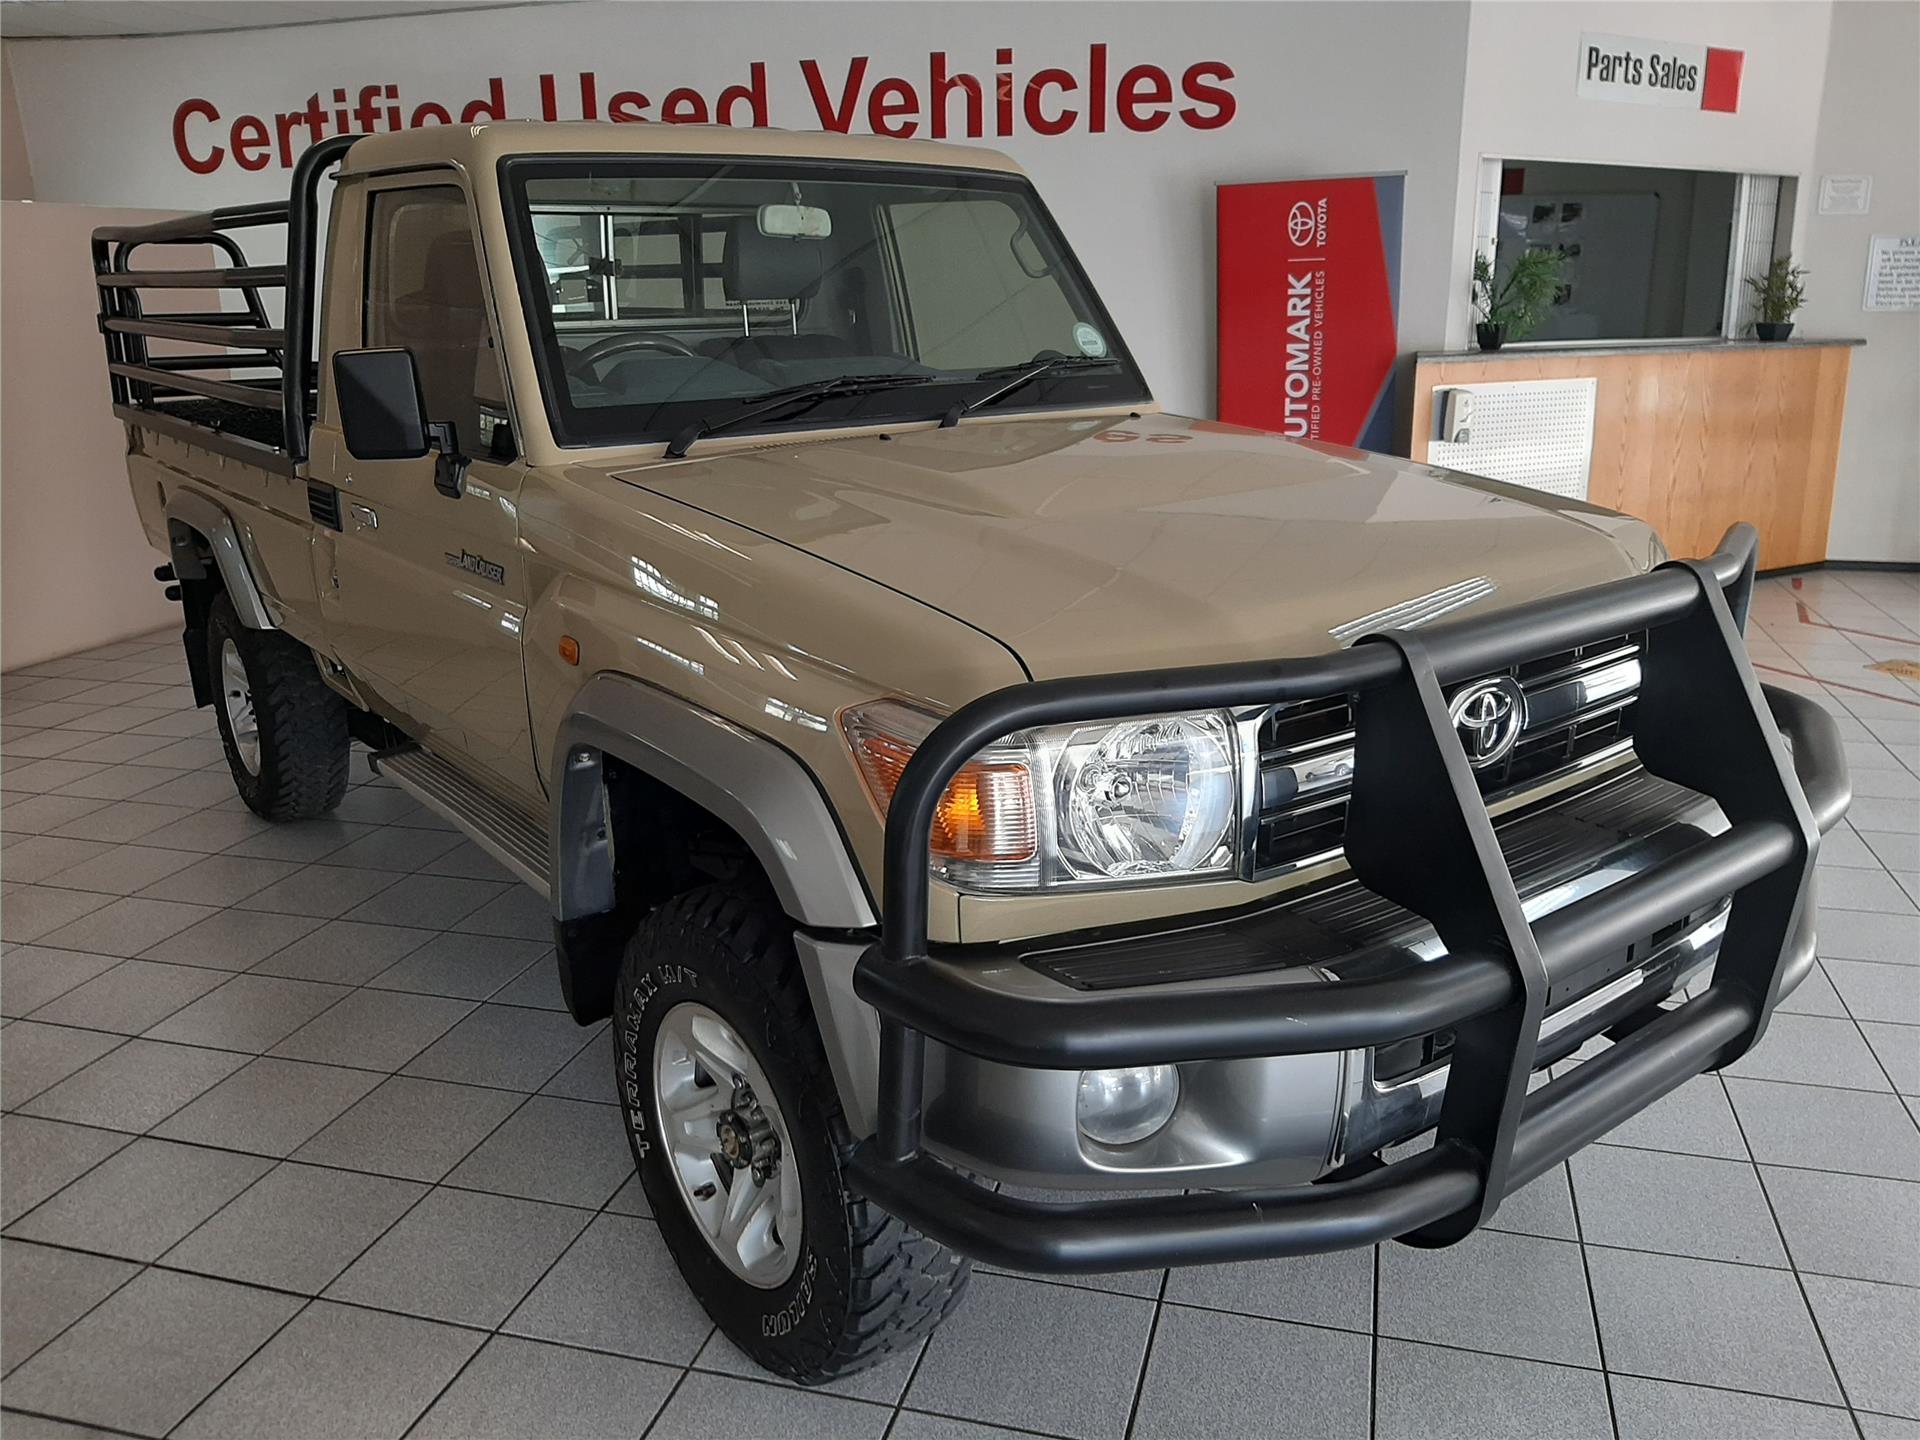 2014 Toyota Land Cruiser 79  for sale - 1059196/1